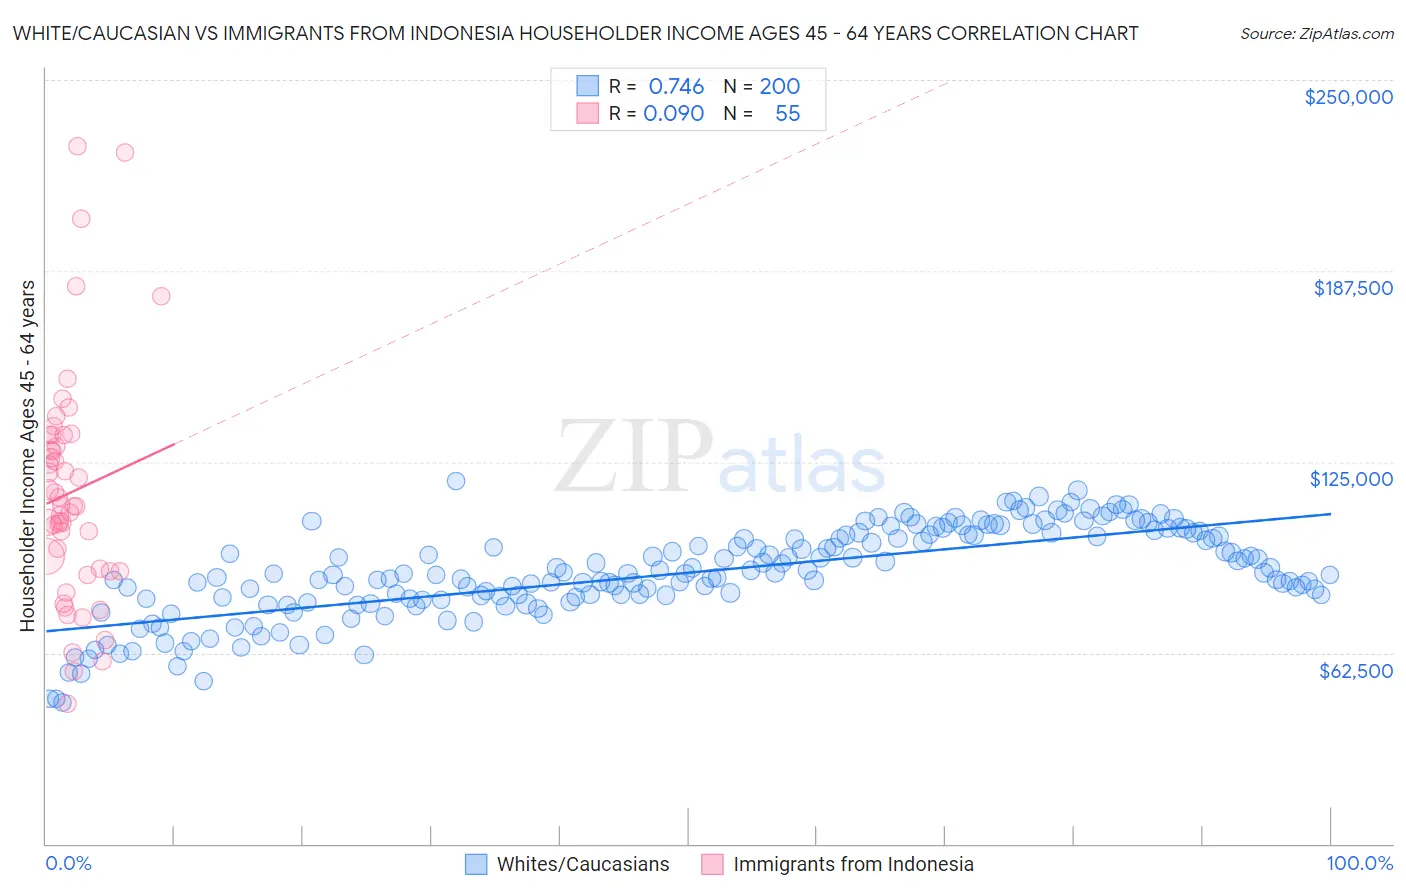 White/Caucasian vs Immigrants from Indonesia Householder Income Ages 45 - 64 years